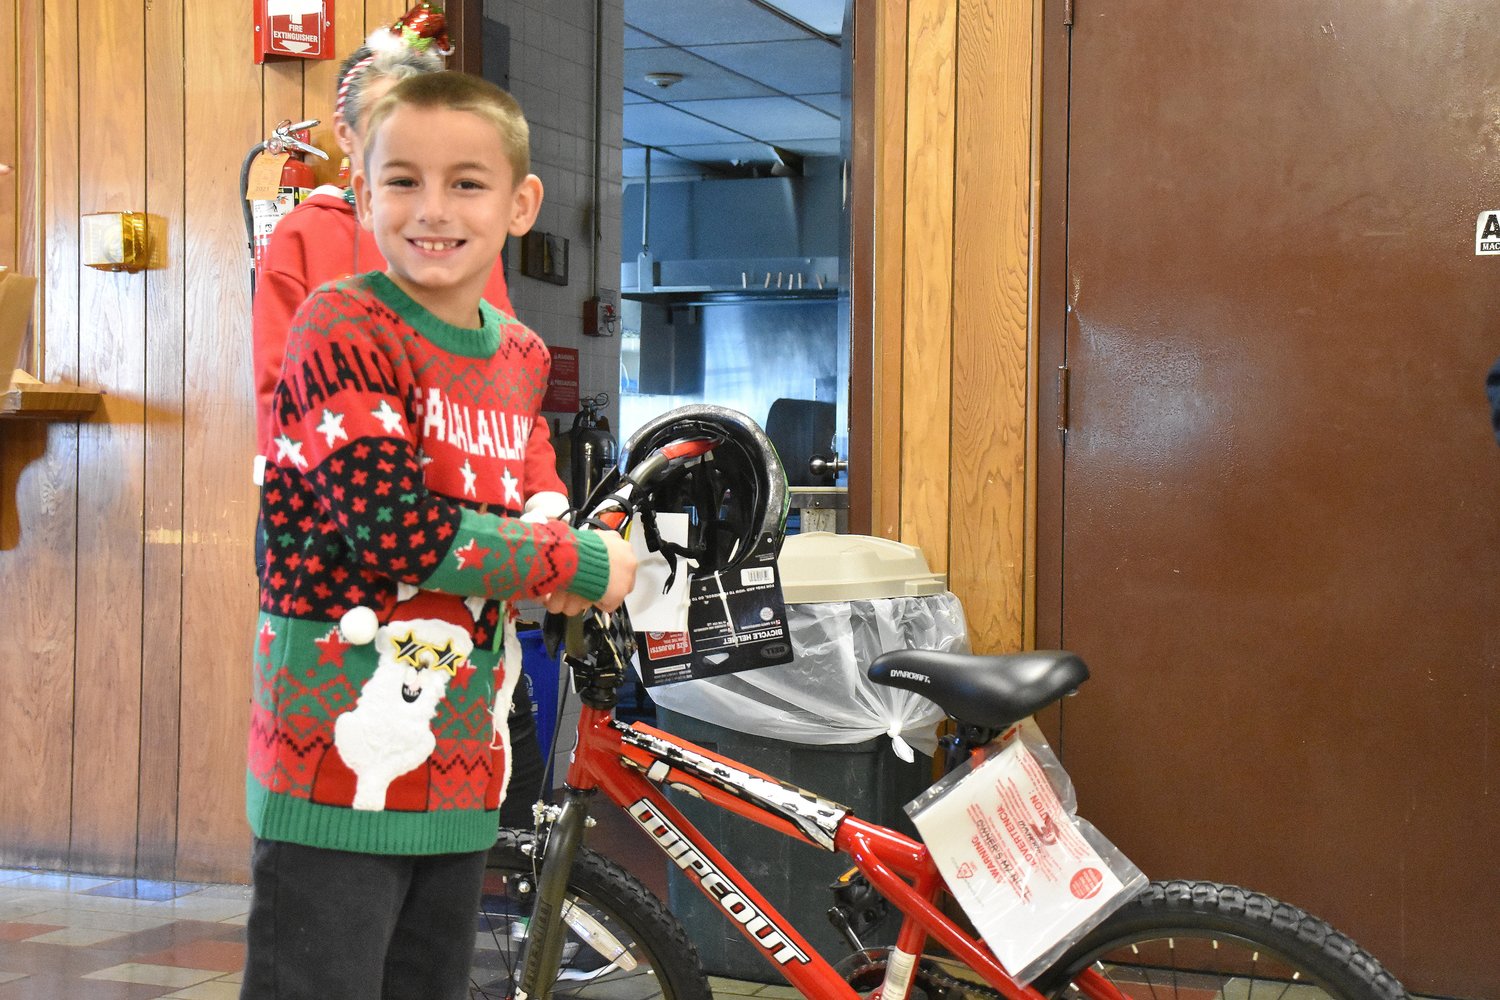 Cole Franco, age 6, and a student at Guiteras School, was one of the lucky winners during the Cup Defenders Association Children's Christmas Party last Sunday.